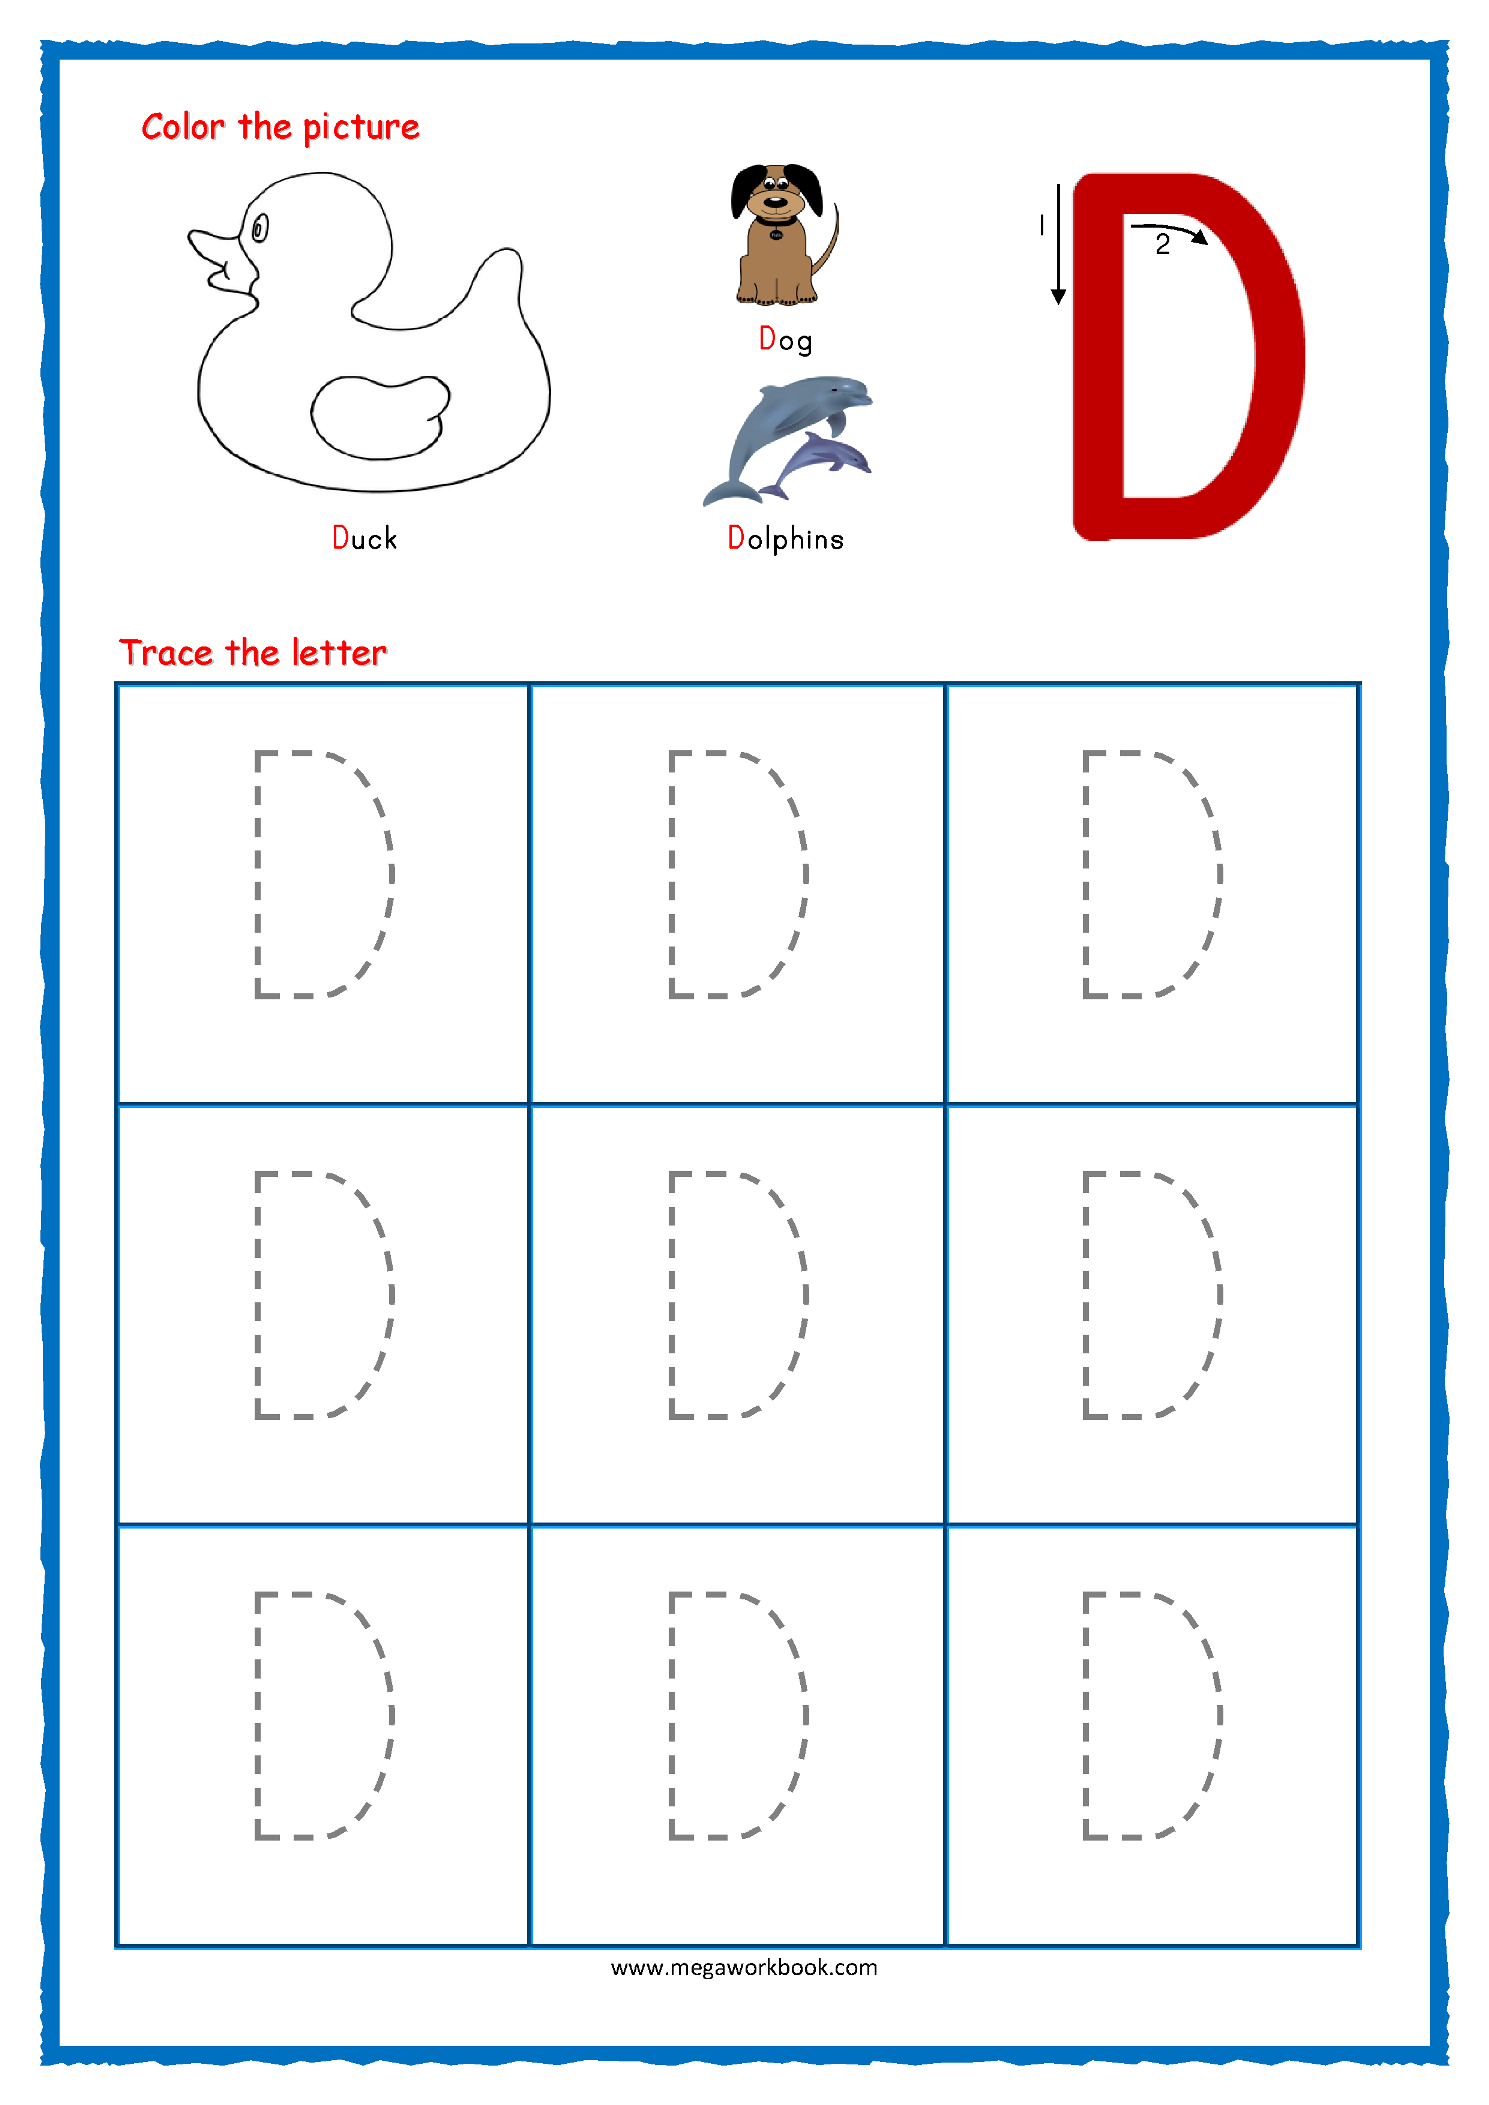 Tracing Letters - Alphabet Tracing - Capital Letters for Tracing Uppercase Letters For Preschool